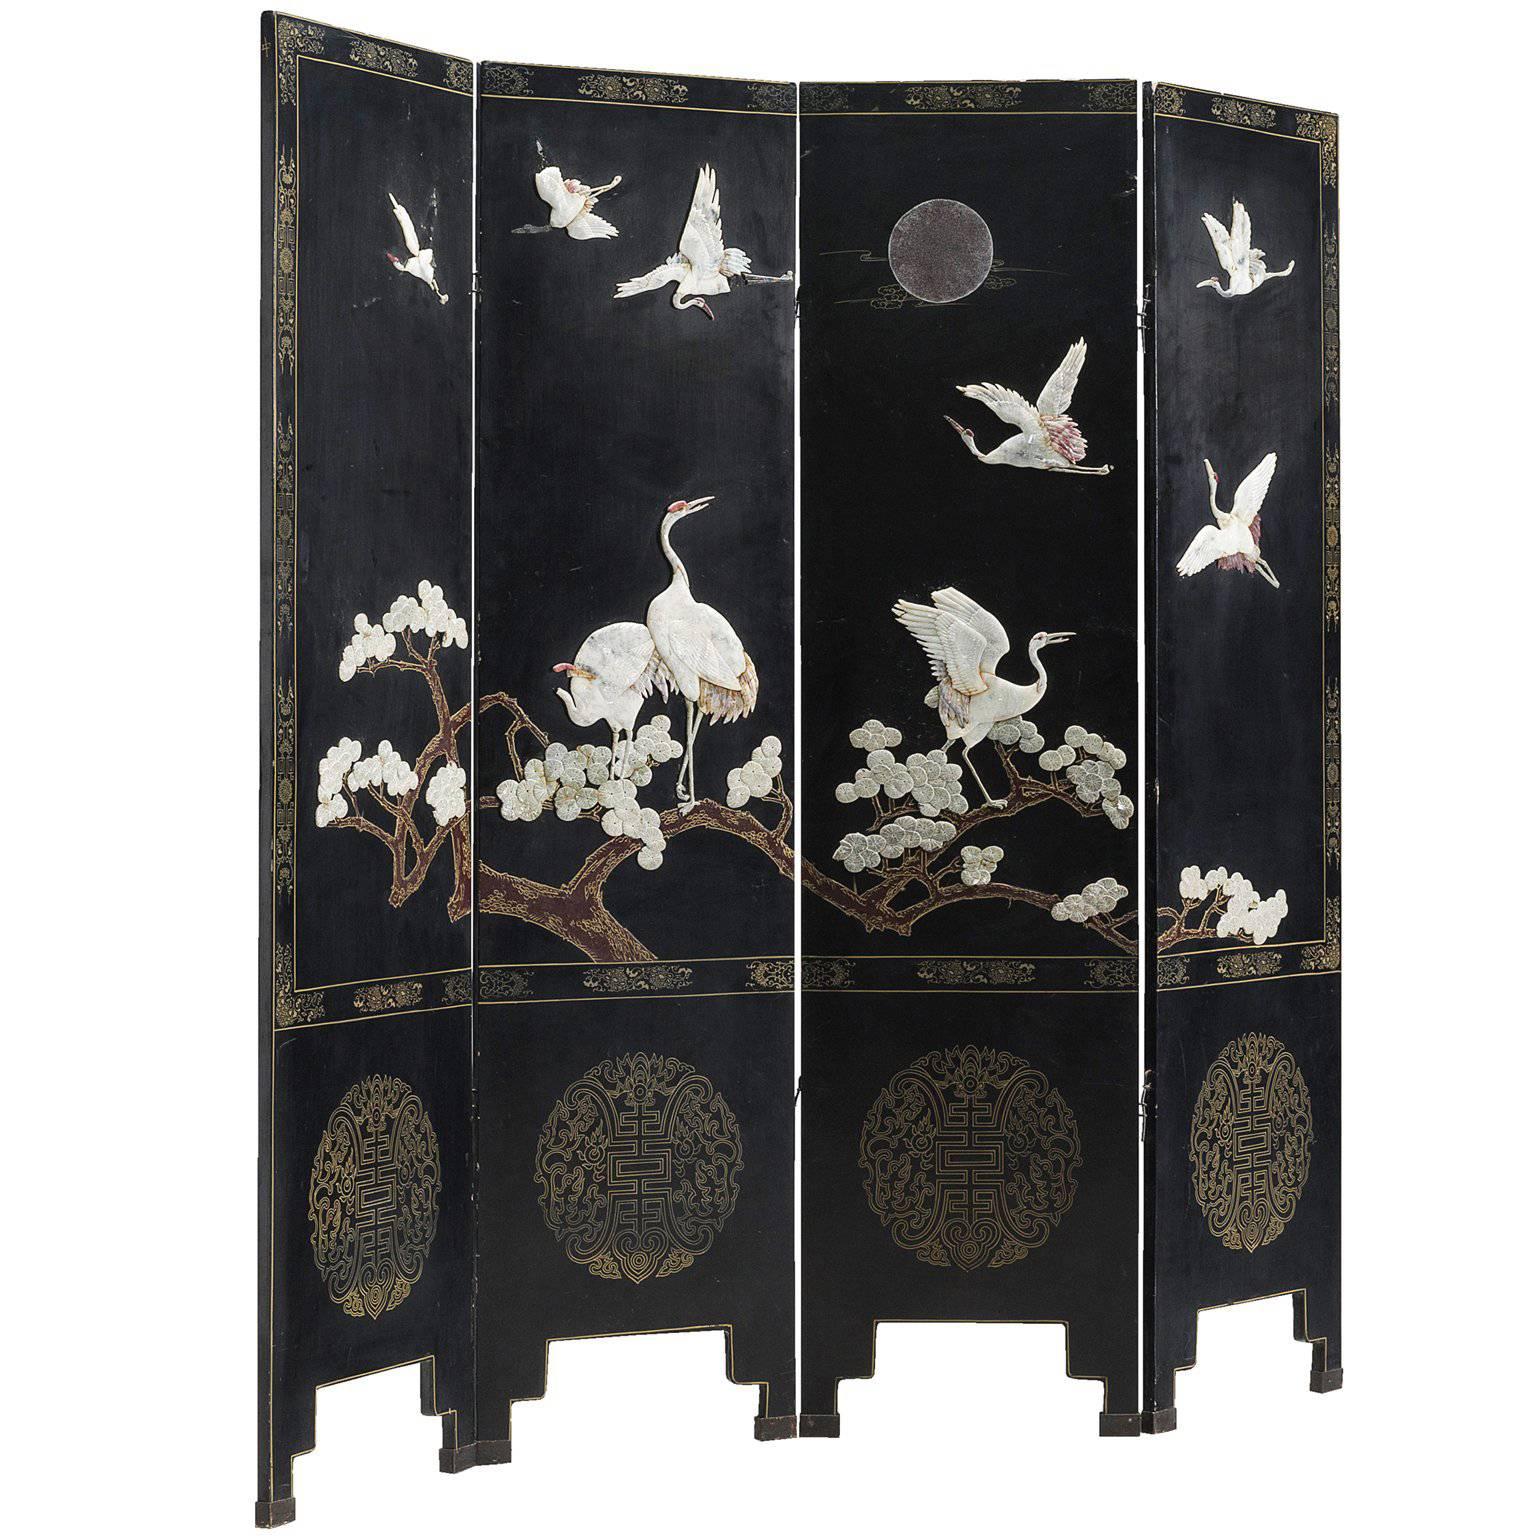 Japonism Room Divider with Cranes and Blossom, 1960s